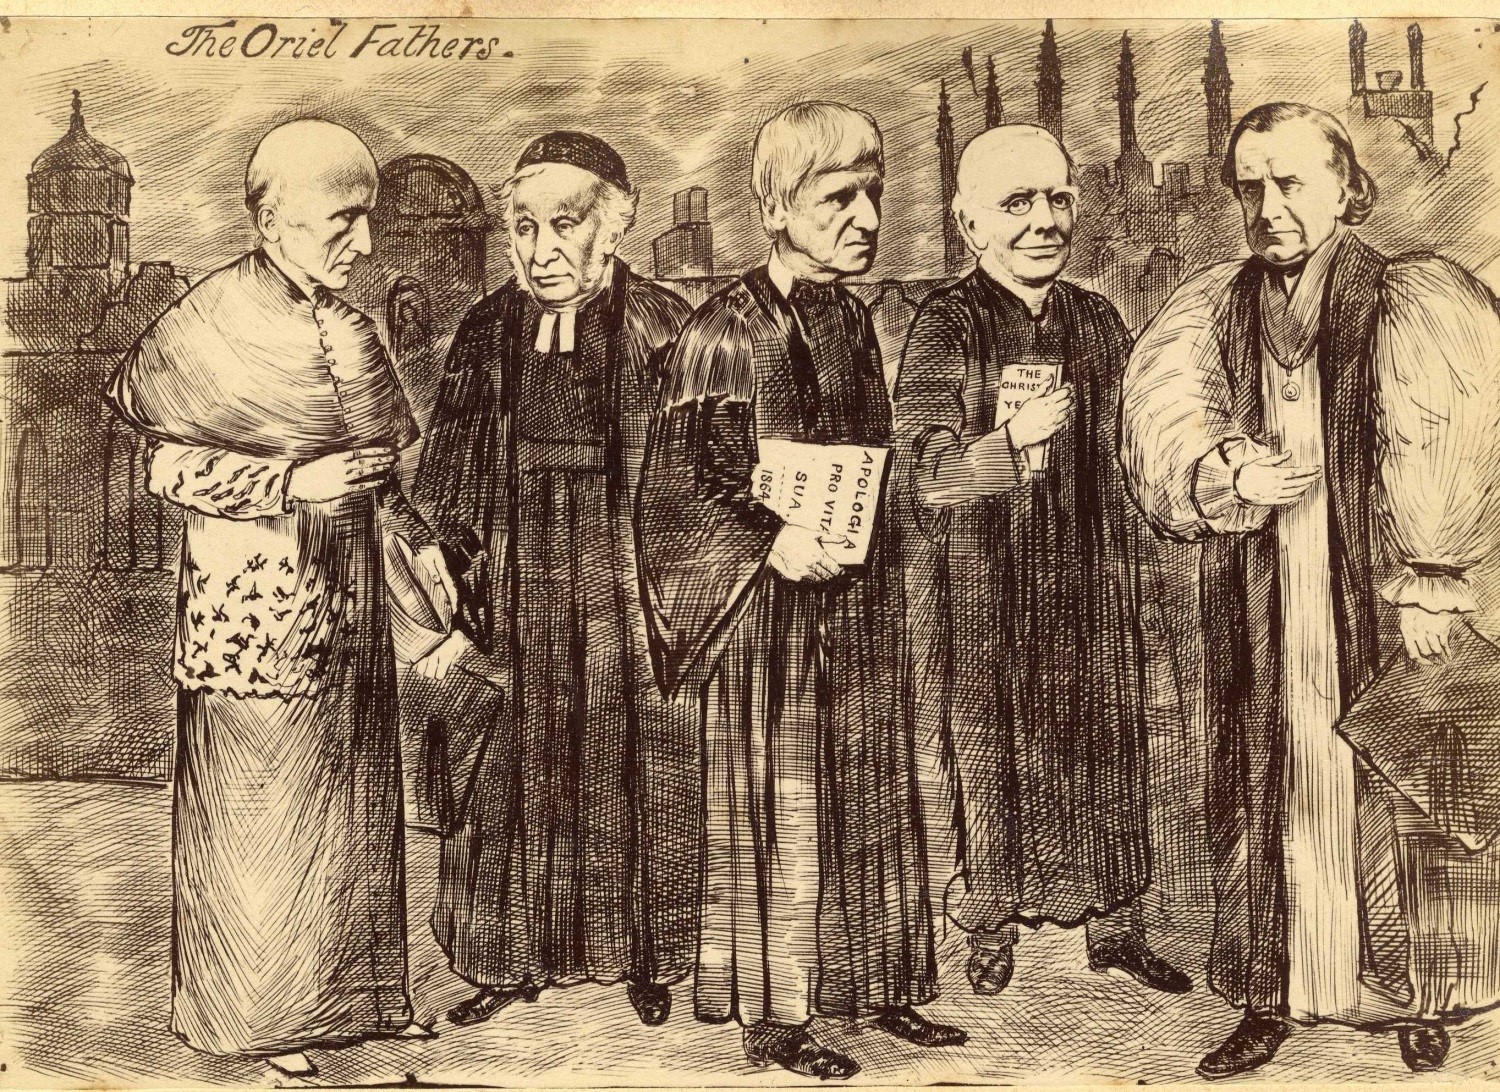 The so-called Oriel Fathers of the Oxford Movement – Manning, Pusey, Newman, Keble and Wilberforce – but Manning was a Christ Church man.